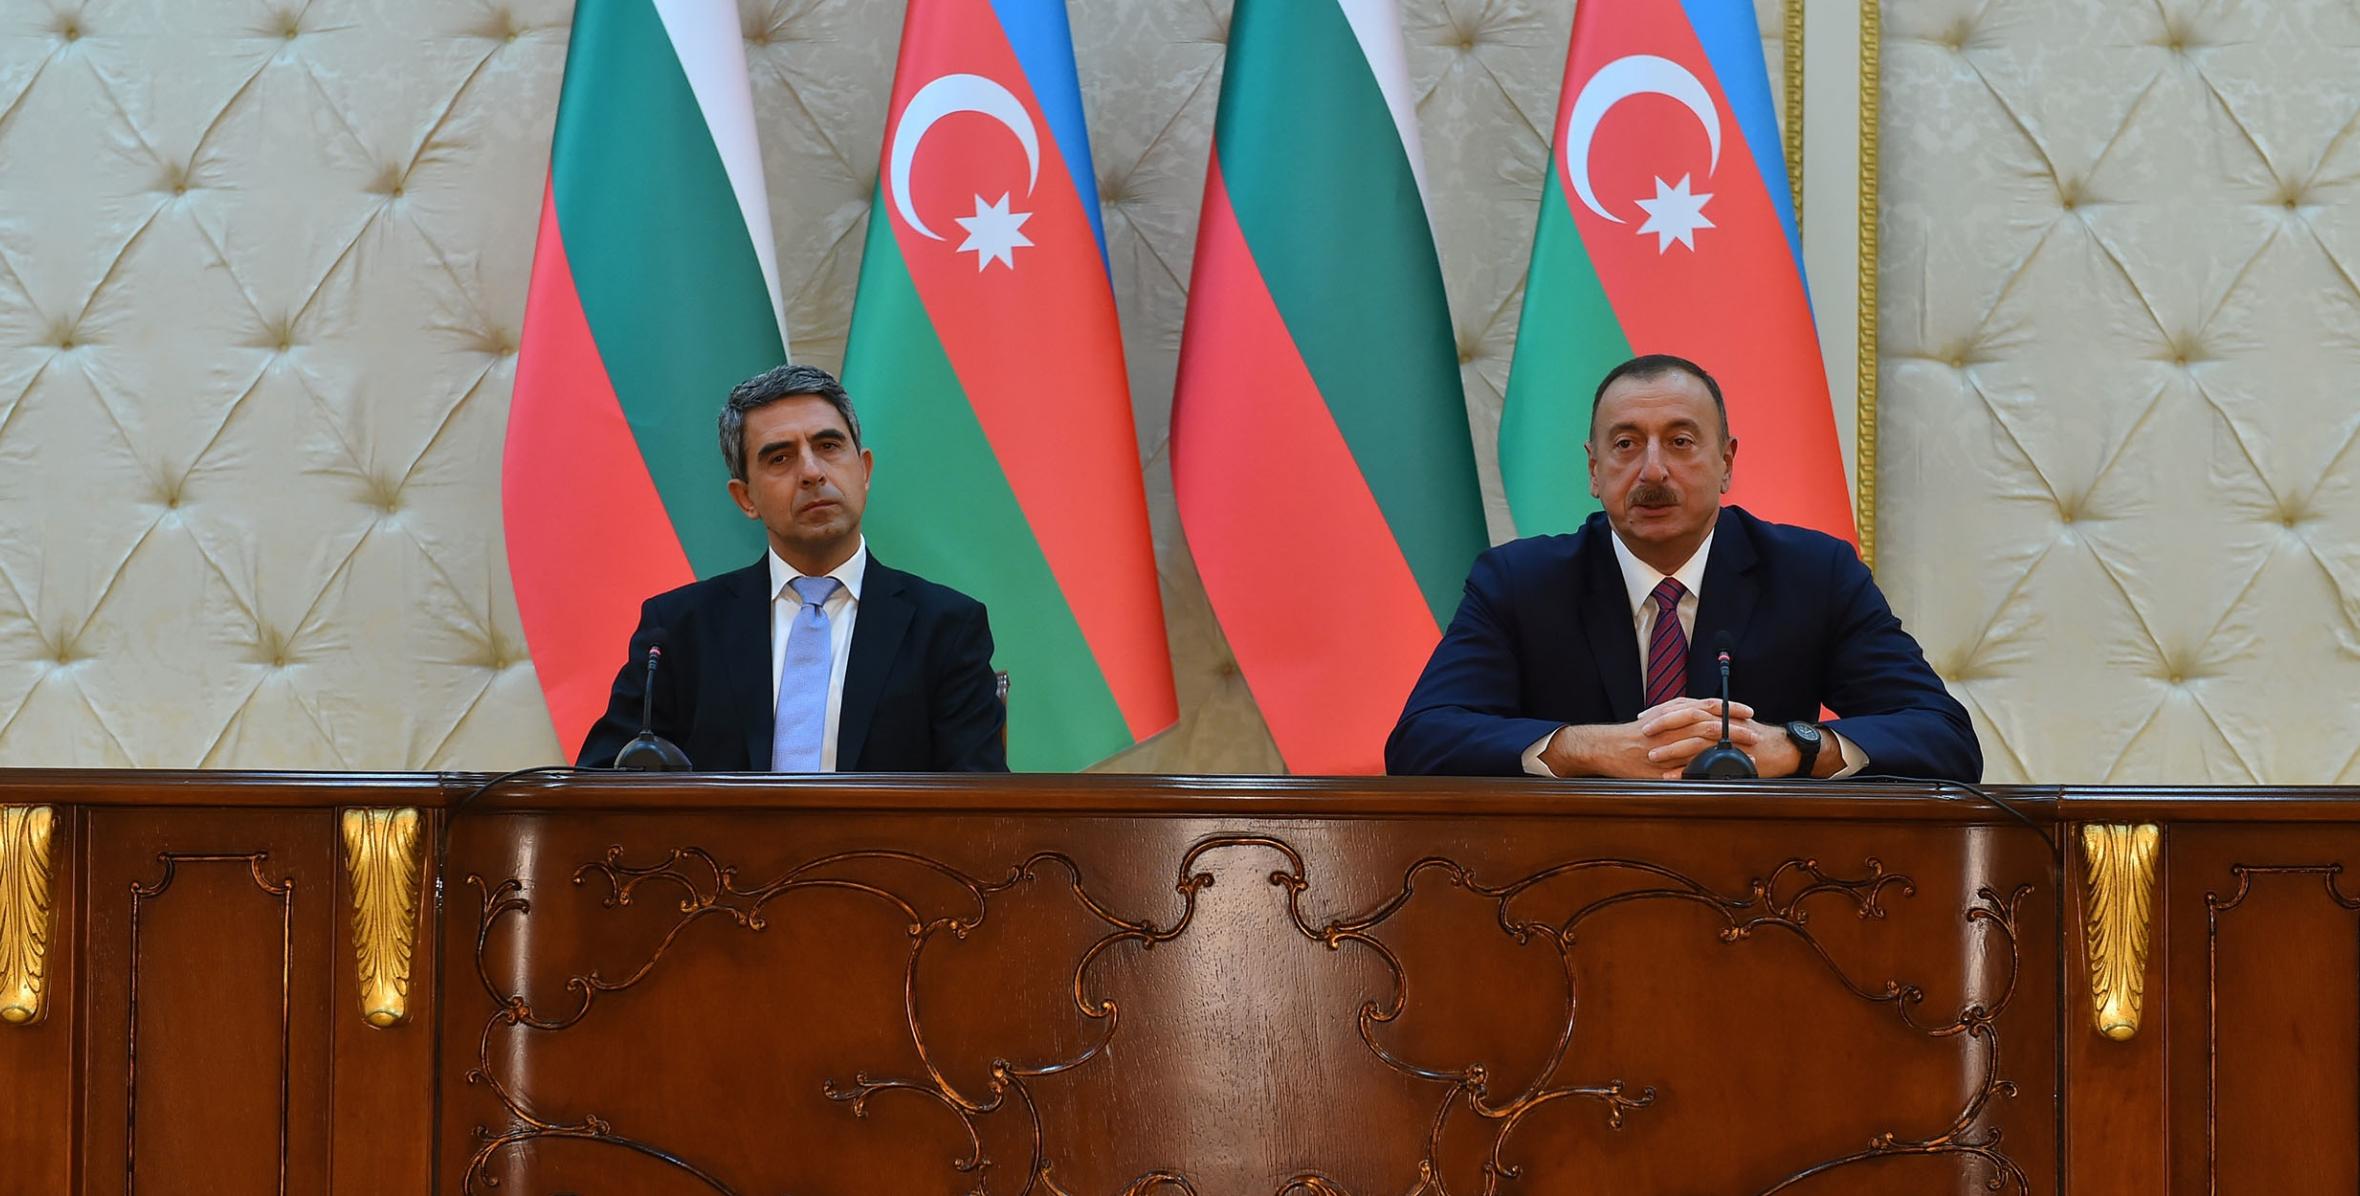 Ilham Aliyev and Bulgarian President Rosen Plevneliev made statements for the press